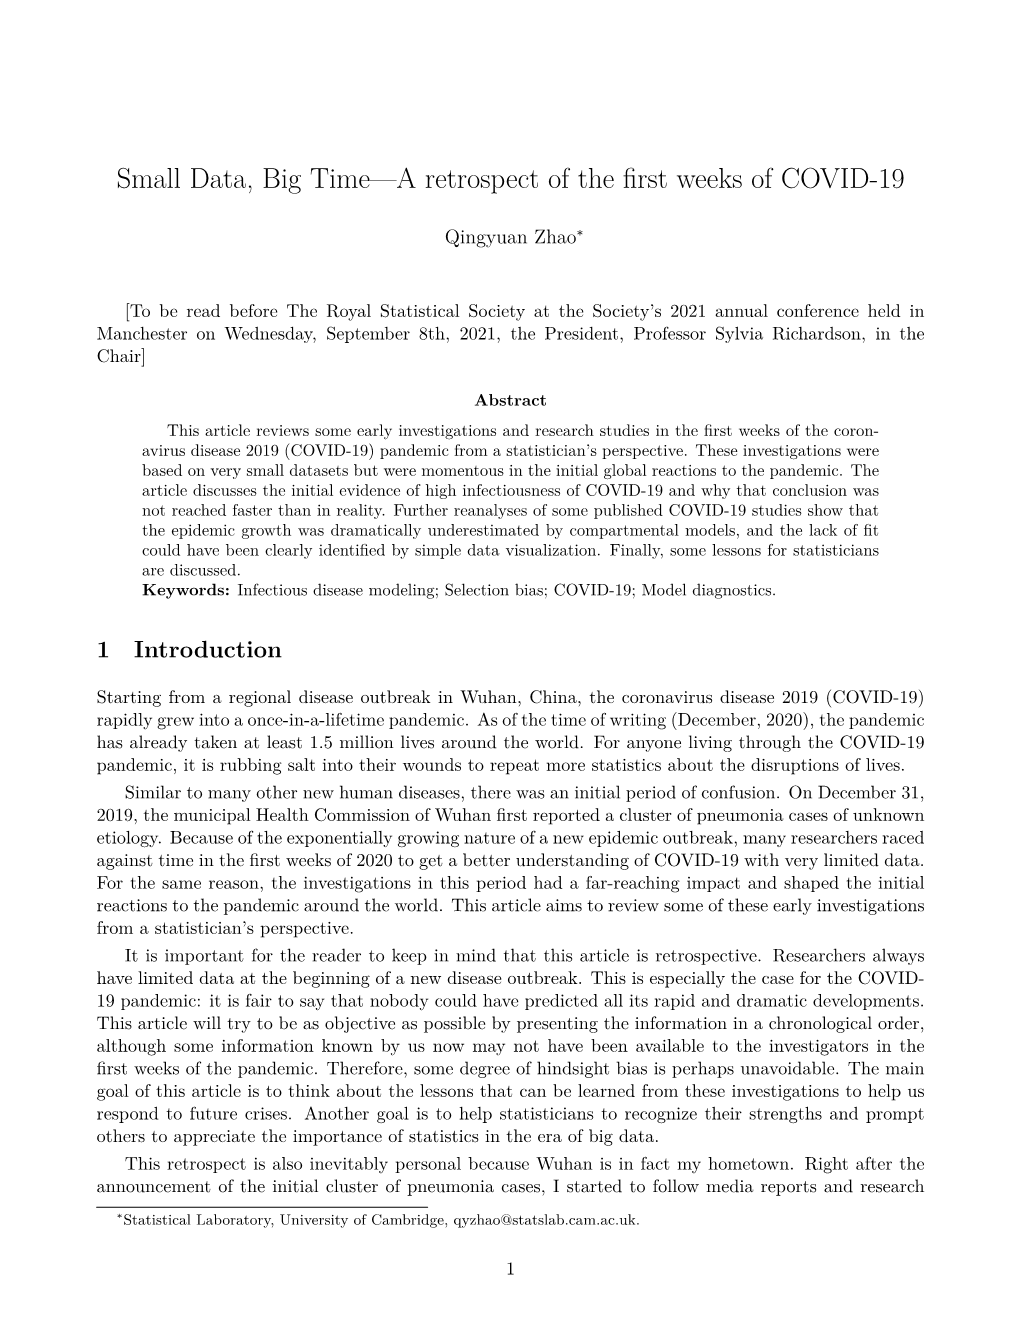 Small Data, Big Time—A Retrospect of the First Weeks of COVID-19